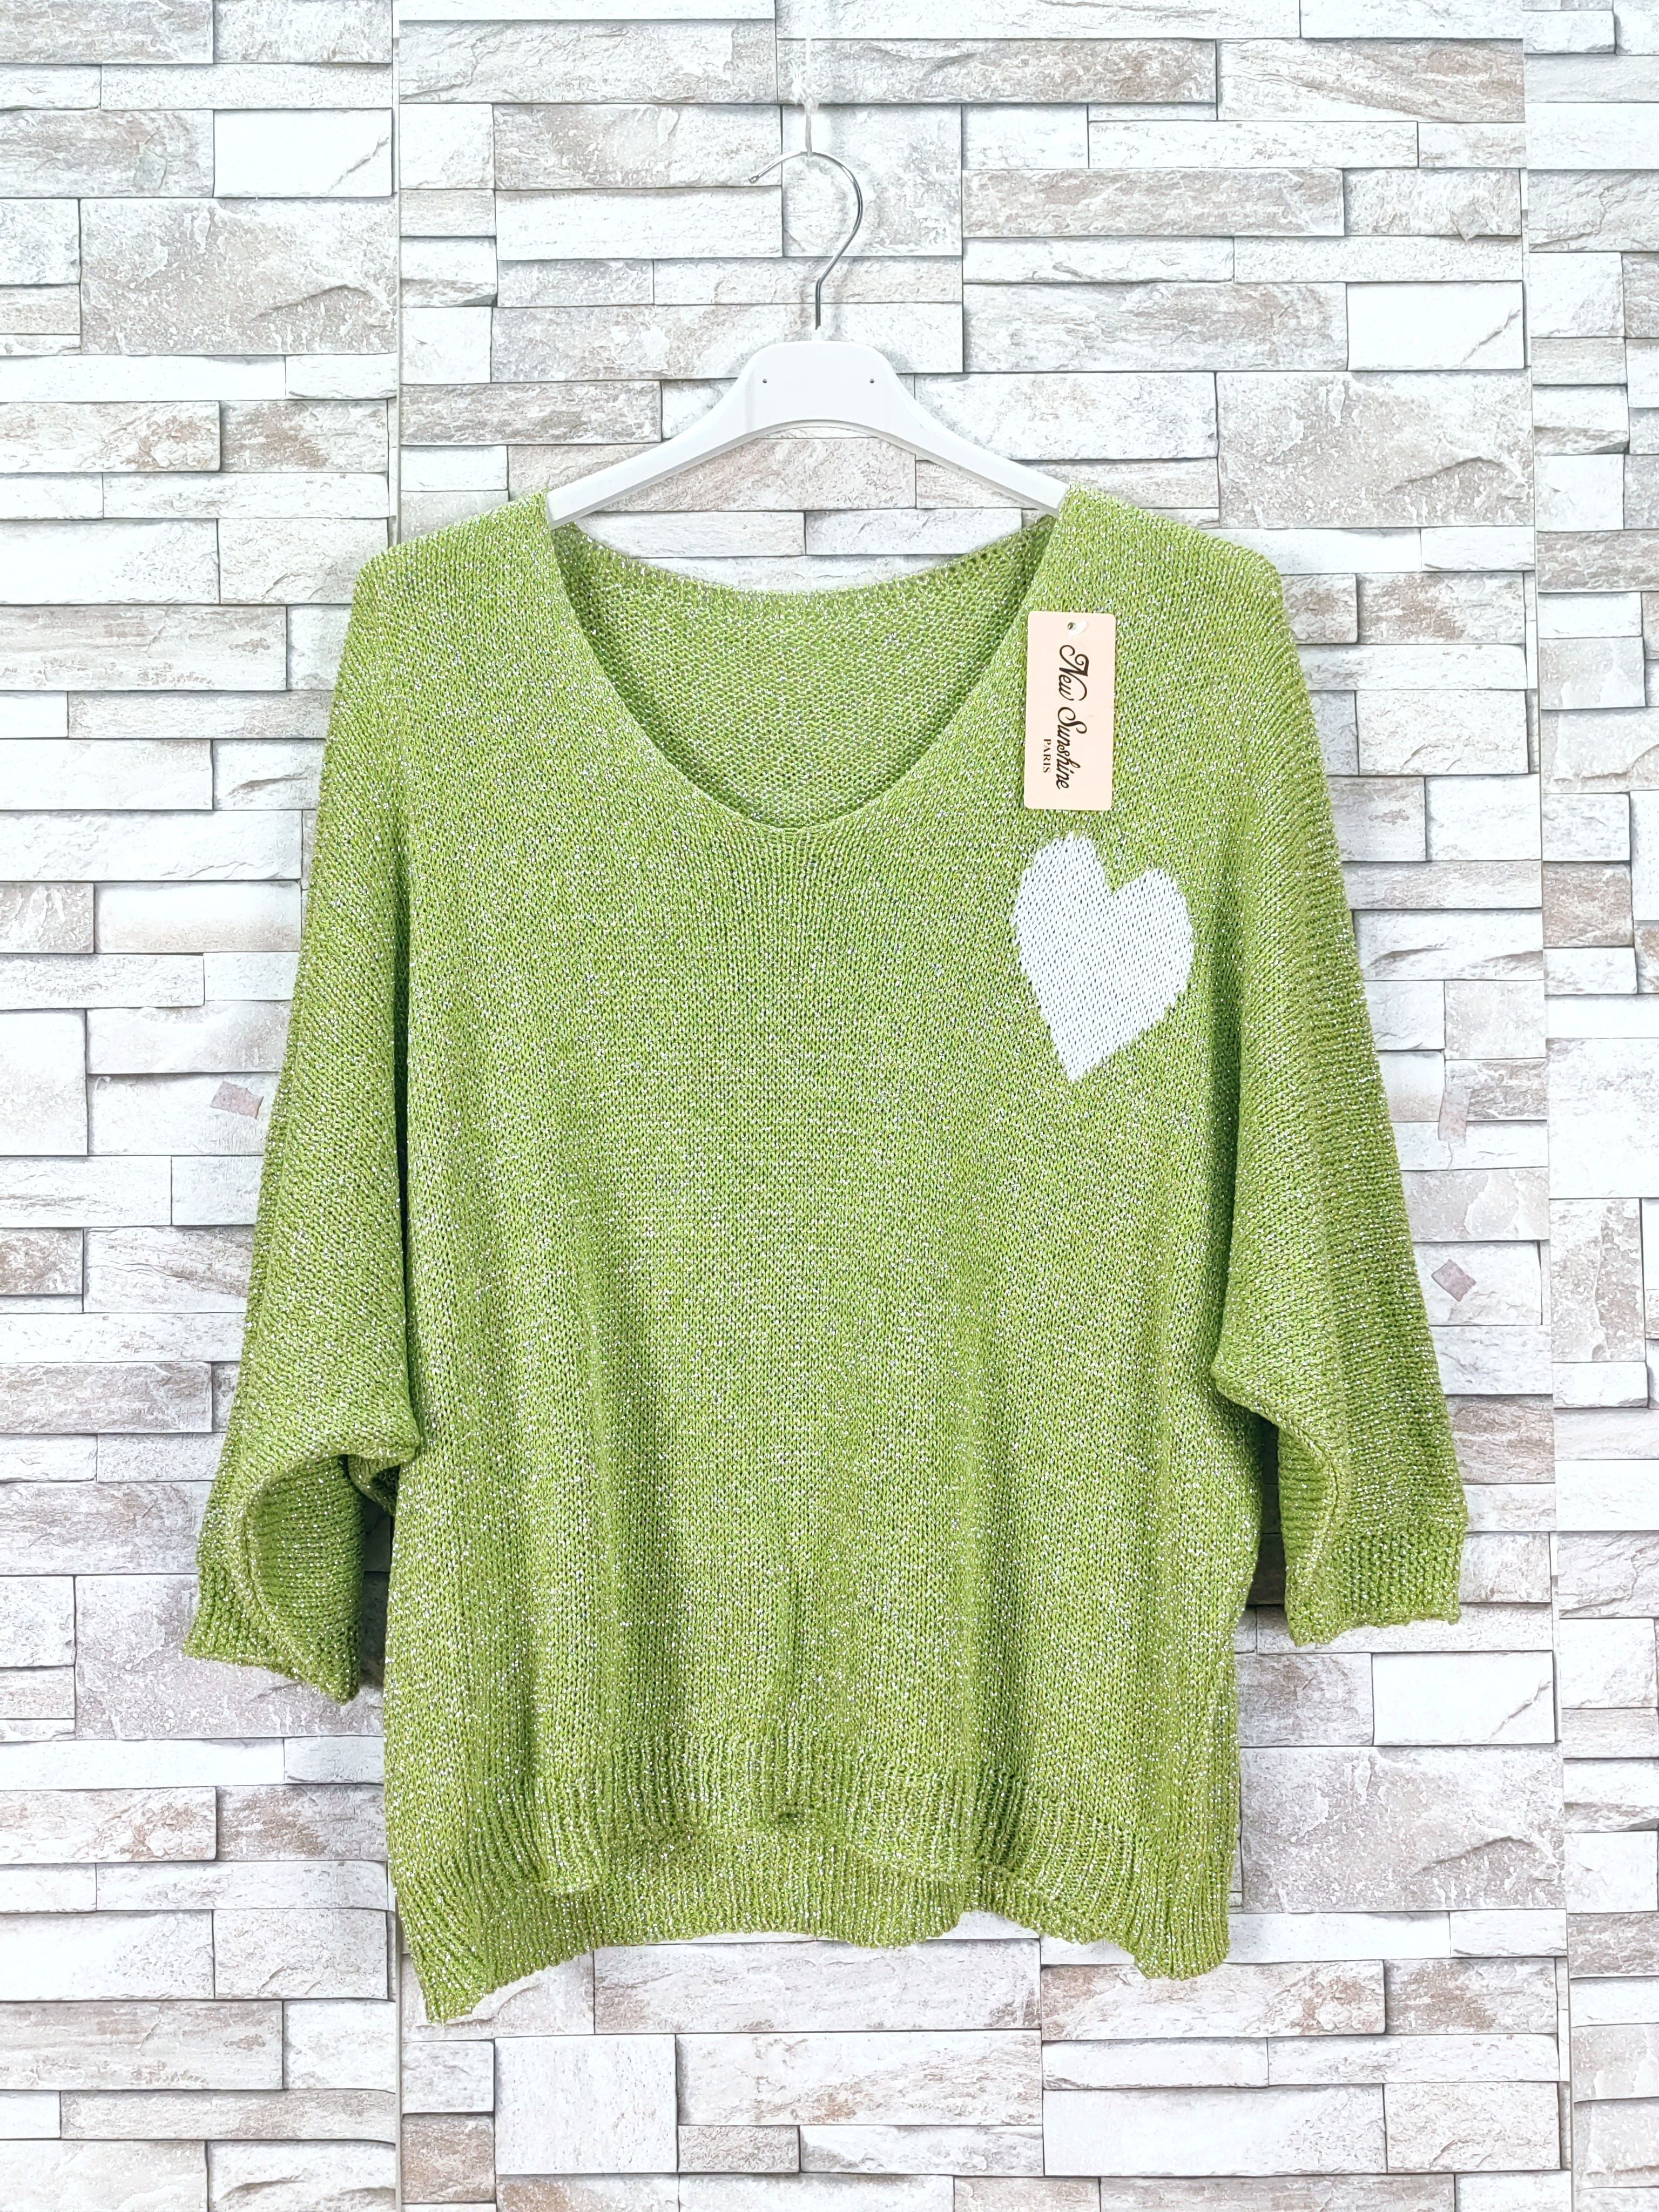 Batwing sleeve sweater with shiny knit (x9)